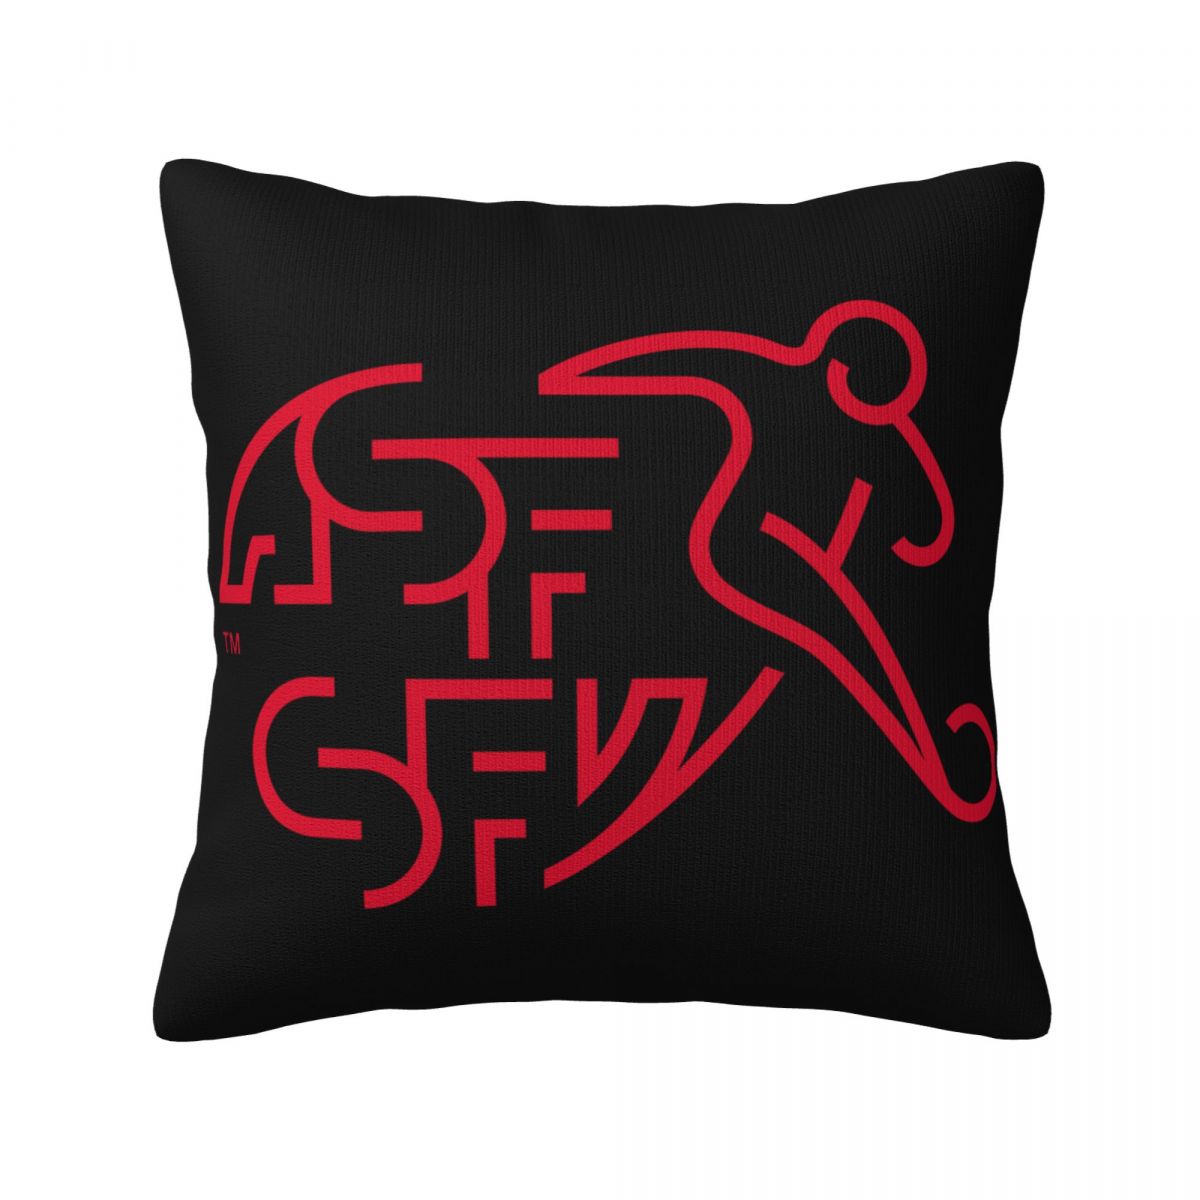 Switzerland National Football Team Decorative Square Throw Pillow Covers